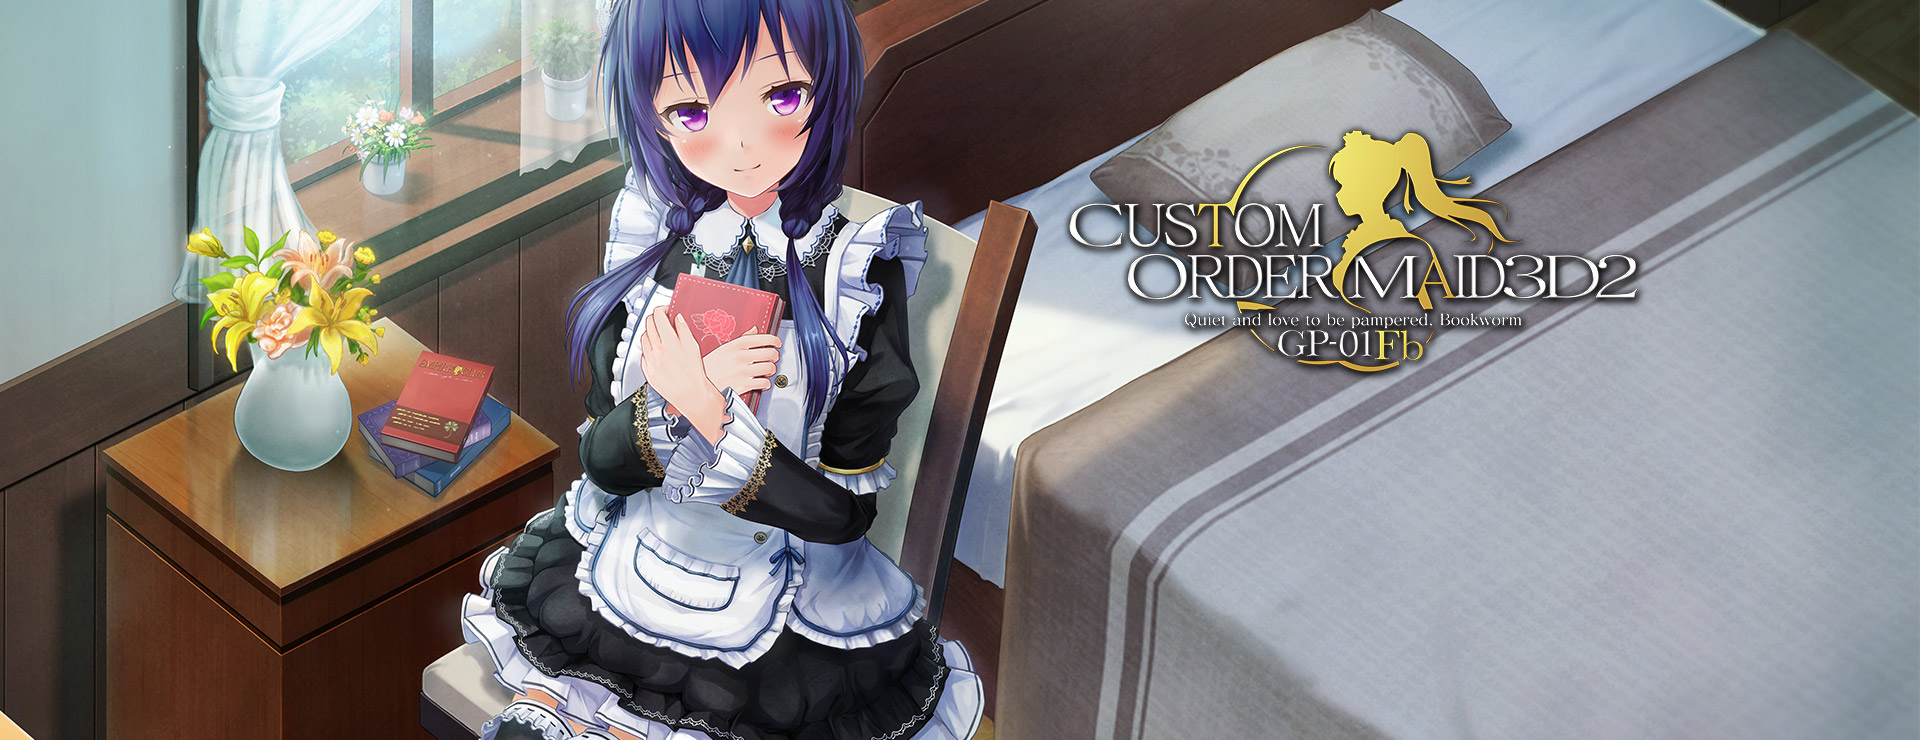 Custom Order Maid 3D2 - Quiet and love to be pampered Bookworm GP-01Fb DLC - Simulation Game